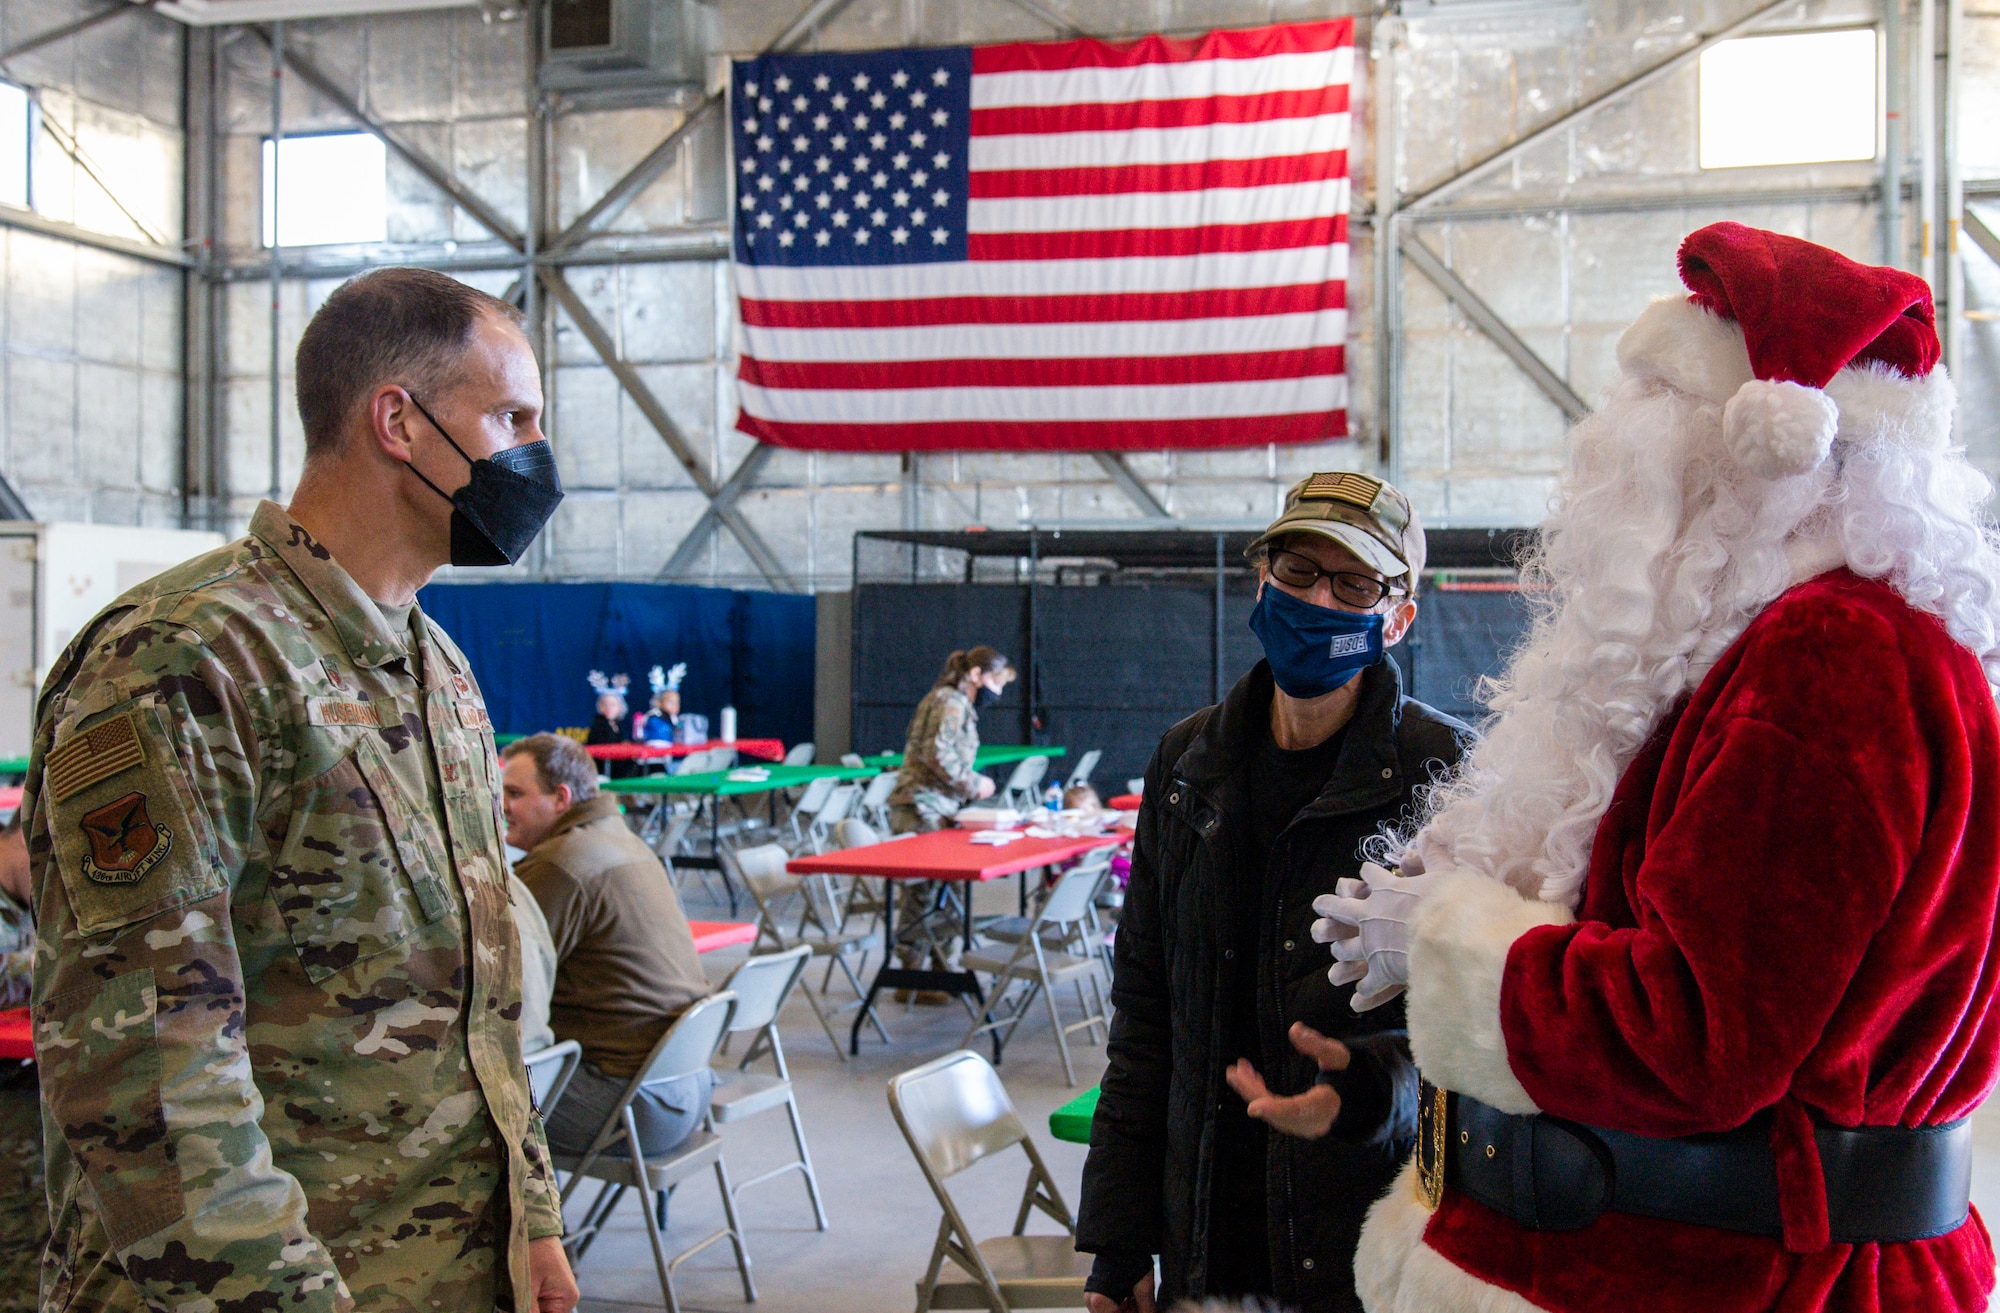 From left, Col. Matt Husemann, 436th Airlift Wing commander, and Jennifer Rambo, 436th AW honorary commander, speak with Santa Claus during Operation Feed the Troops on Dover Air Force Base, Delaware, Dec. 14, 2021. OFTT volunteers served a traditional holiday meal to more than 900 Team Dover members.  Fifty-two turkeys were donated and prepared by local businesses for the event. (U.S. Air Force photo by Roland Balik)